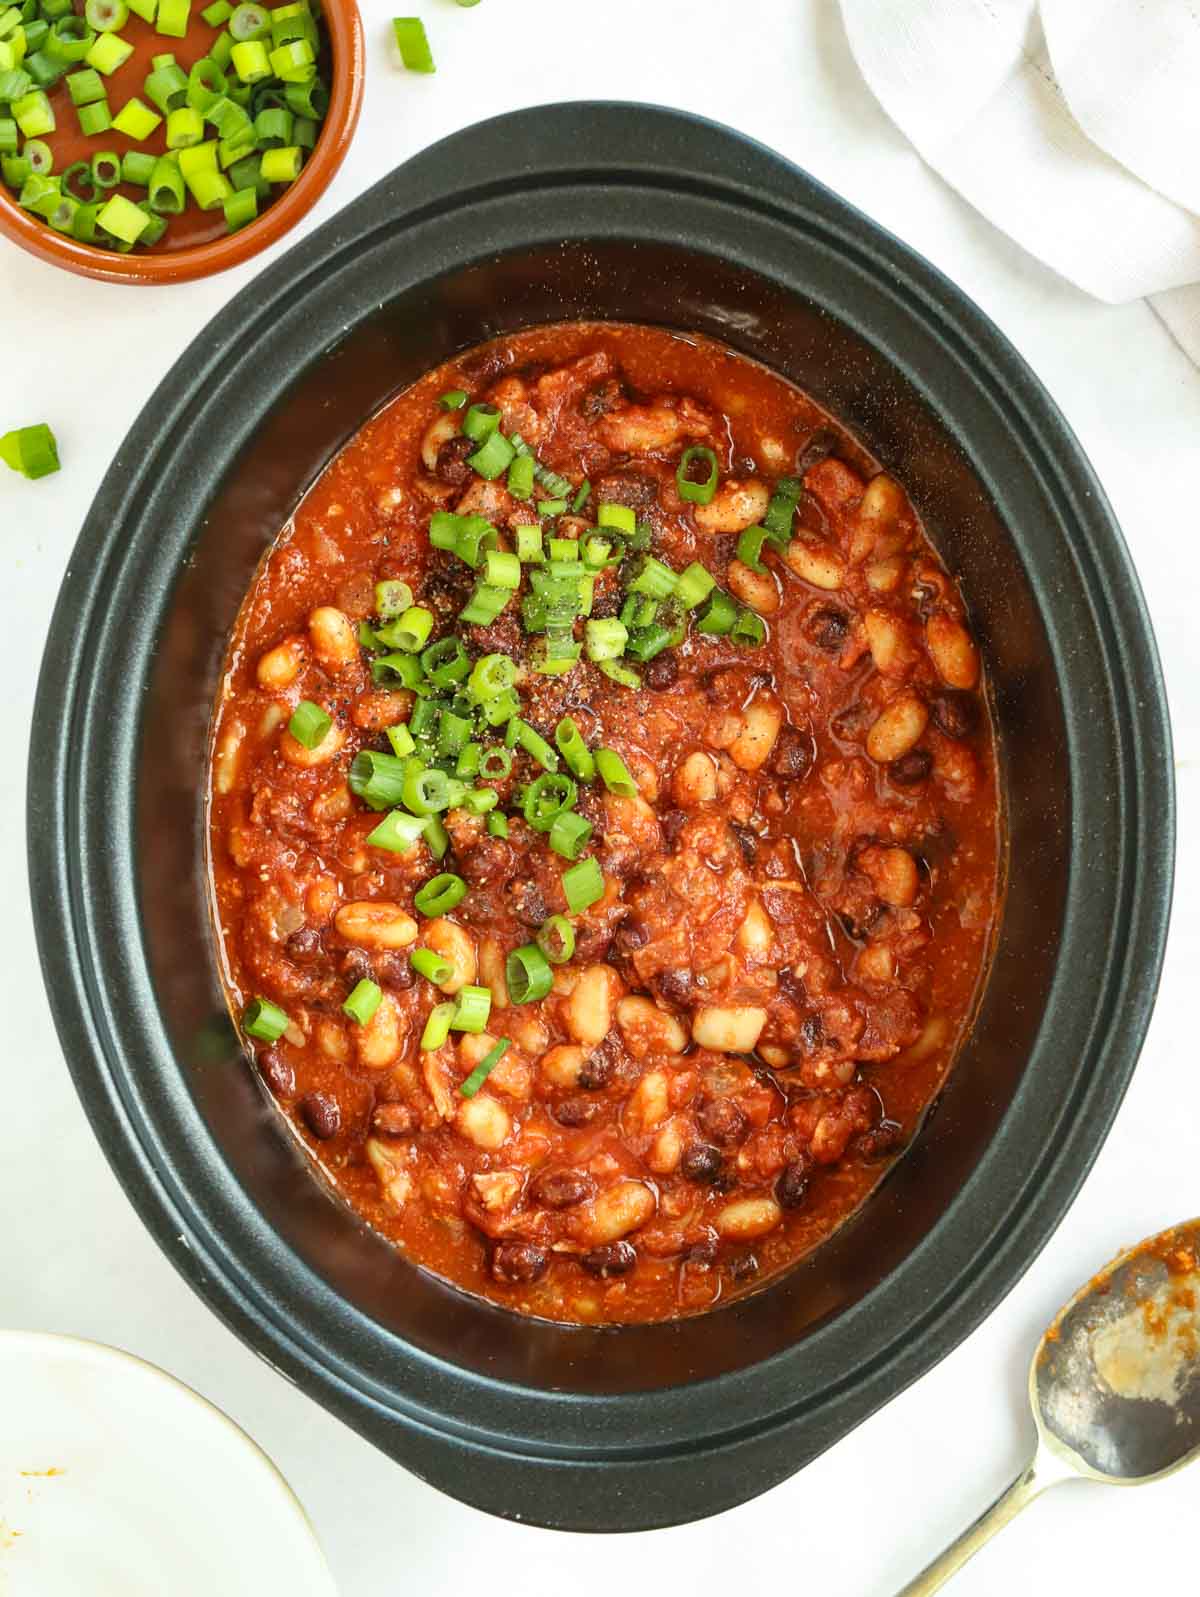 recipe for baked beans made in the slow cooker